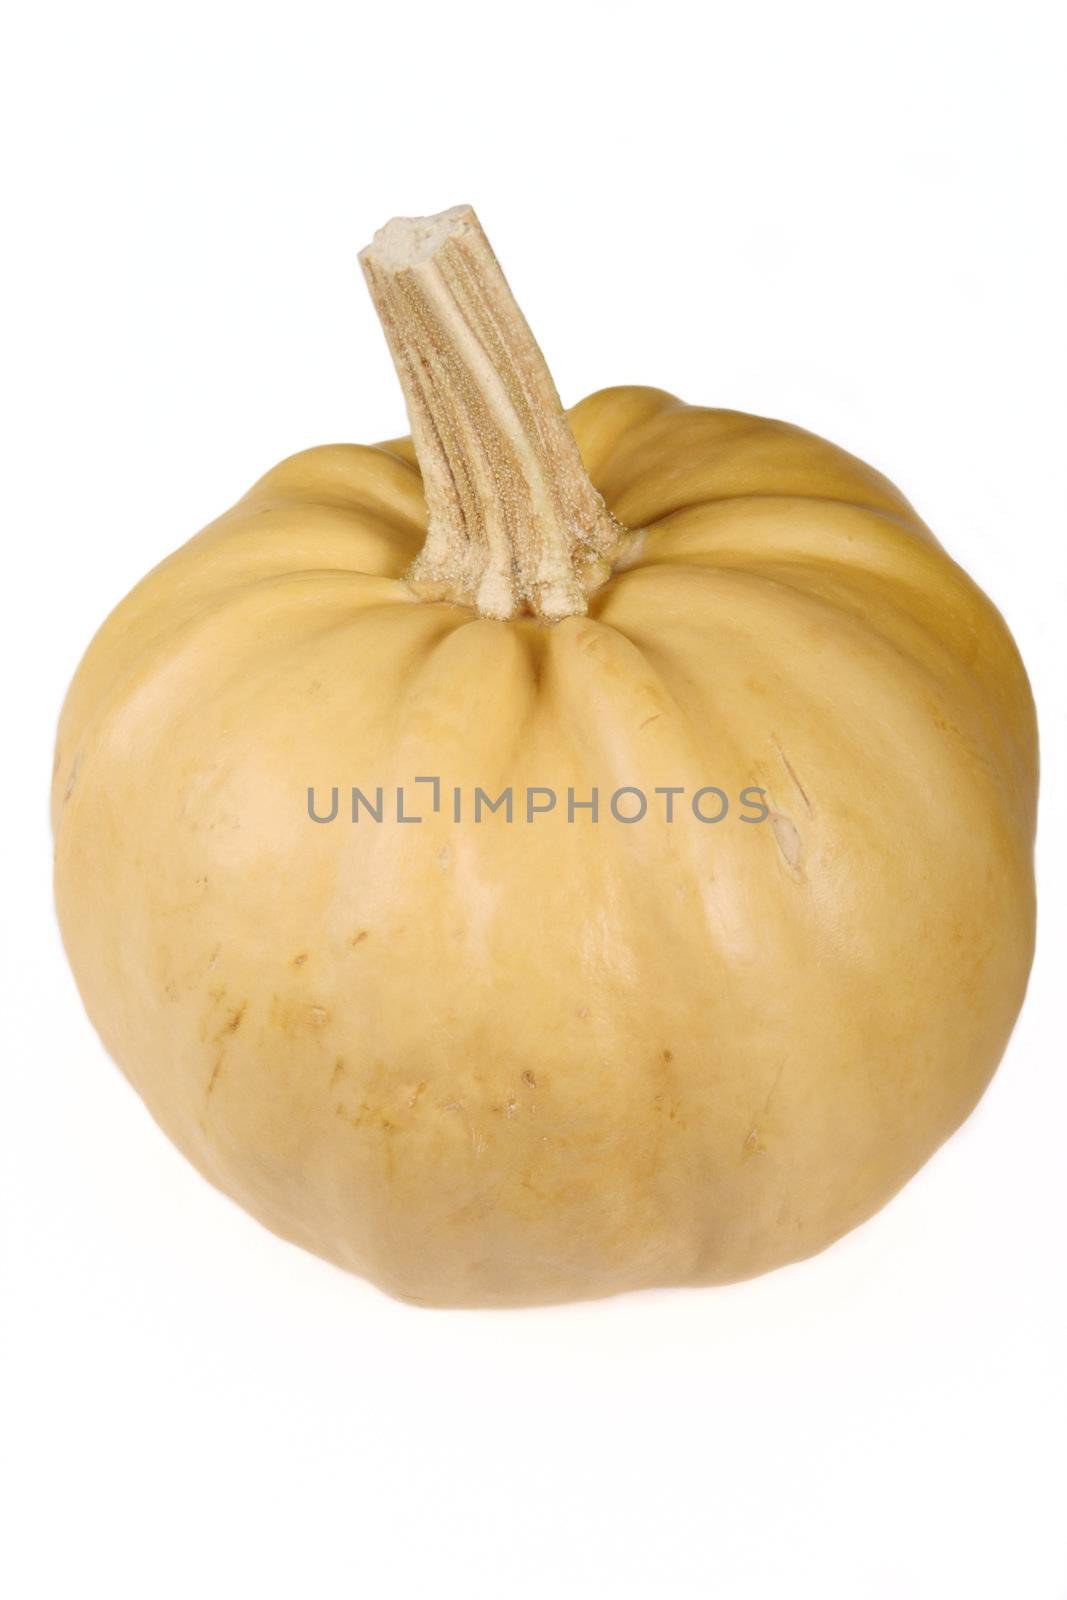 Pumpkin removed close up on a white background without isolation